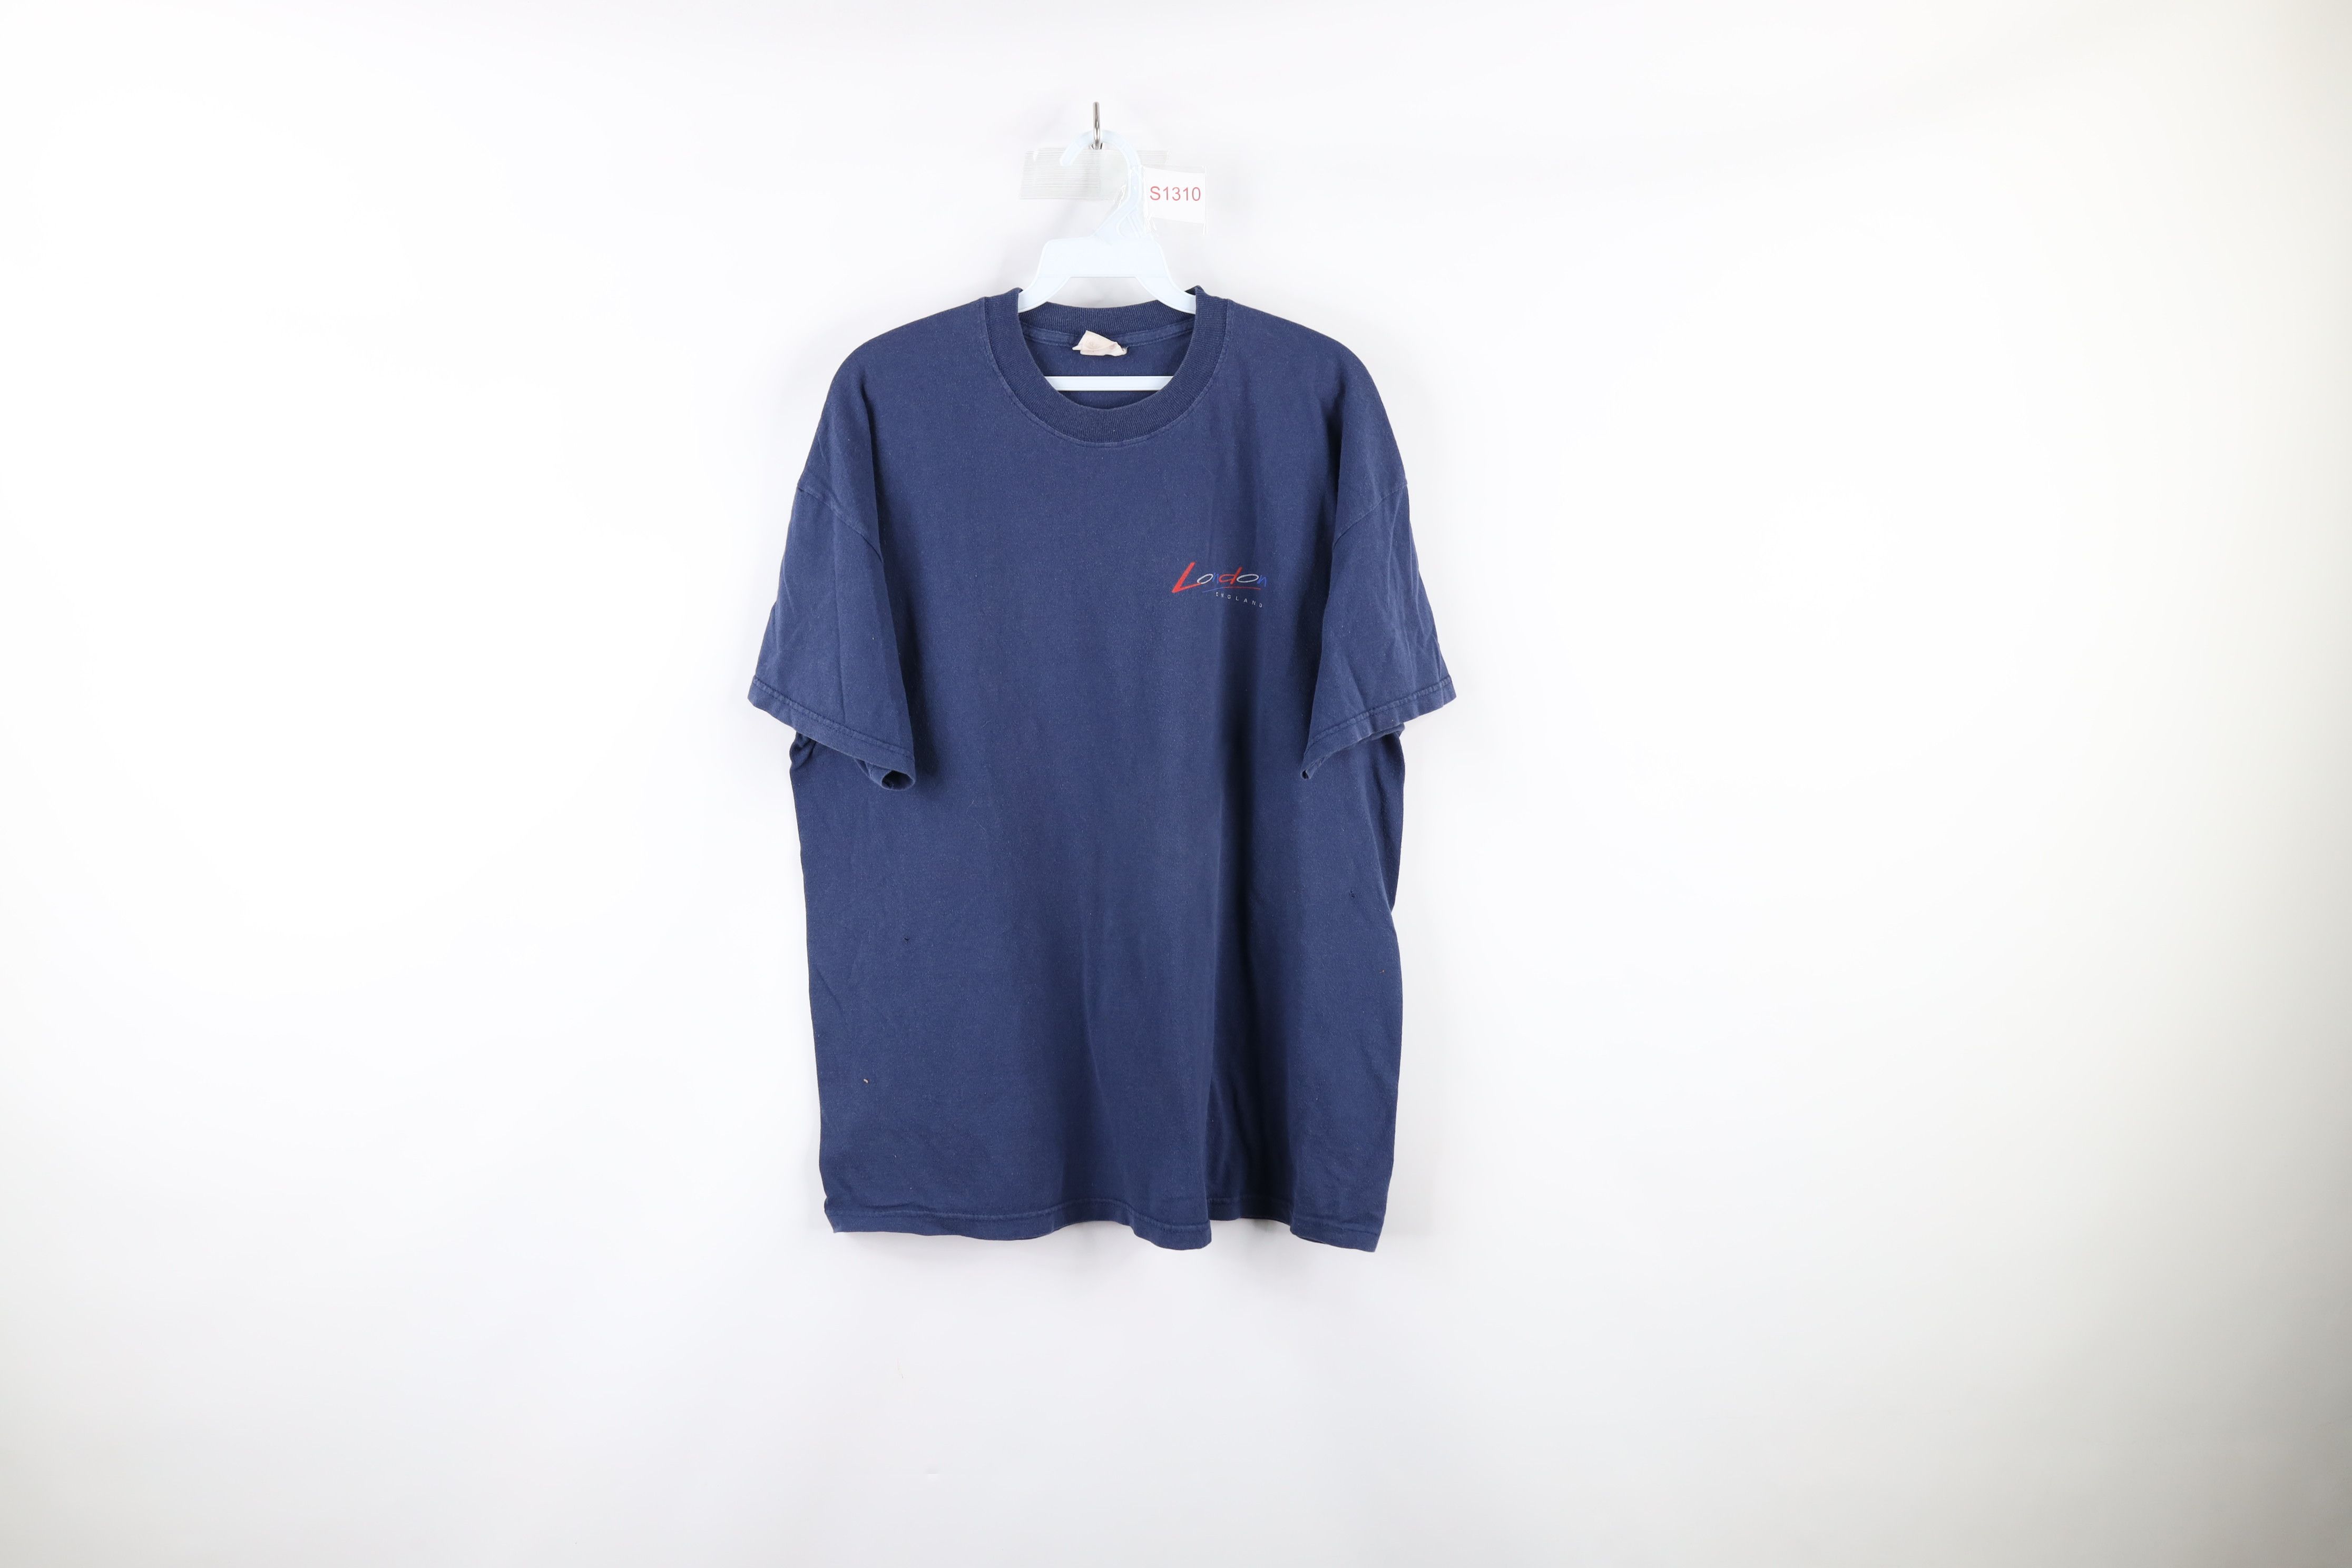 Vintage Vintage 90s Streetwear London England Spell Out T-Shirt Blue Size US XL / EU 56 / 4 - 1 Preview